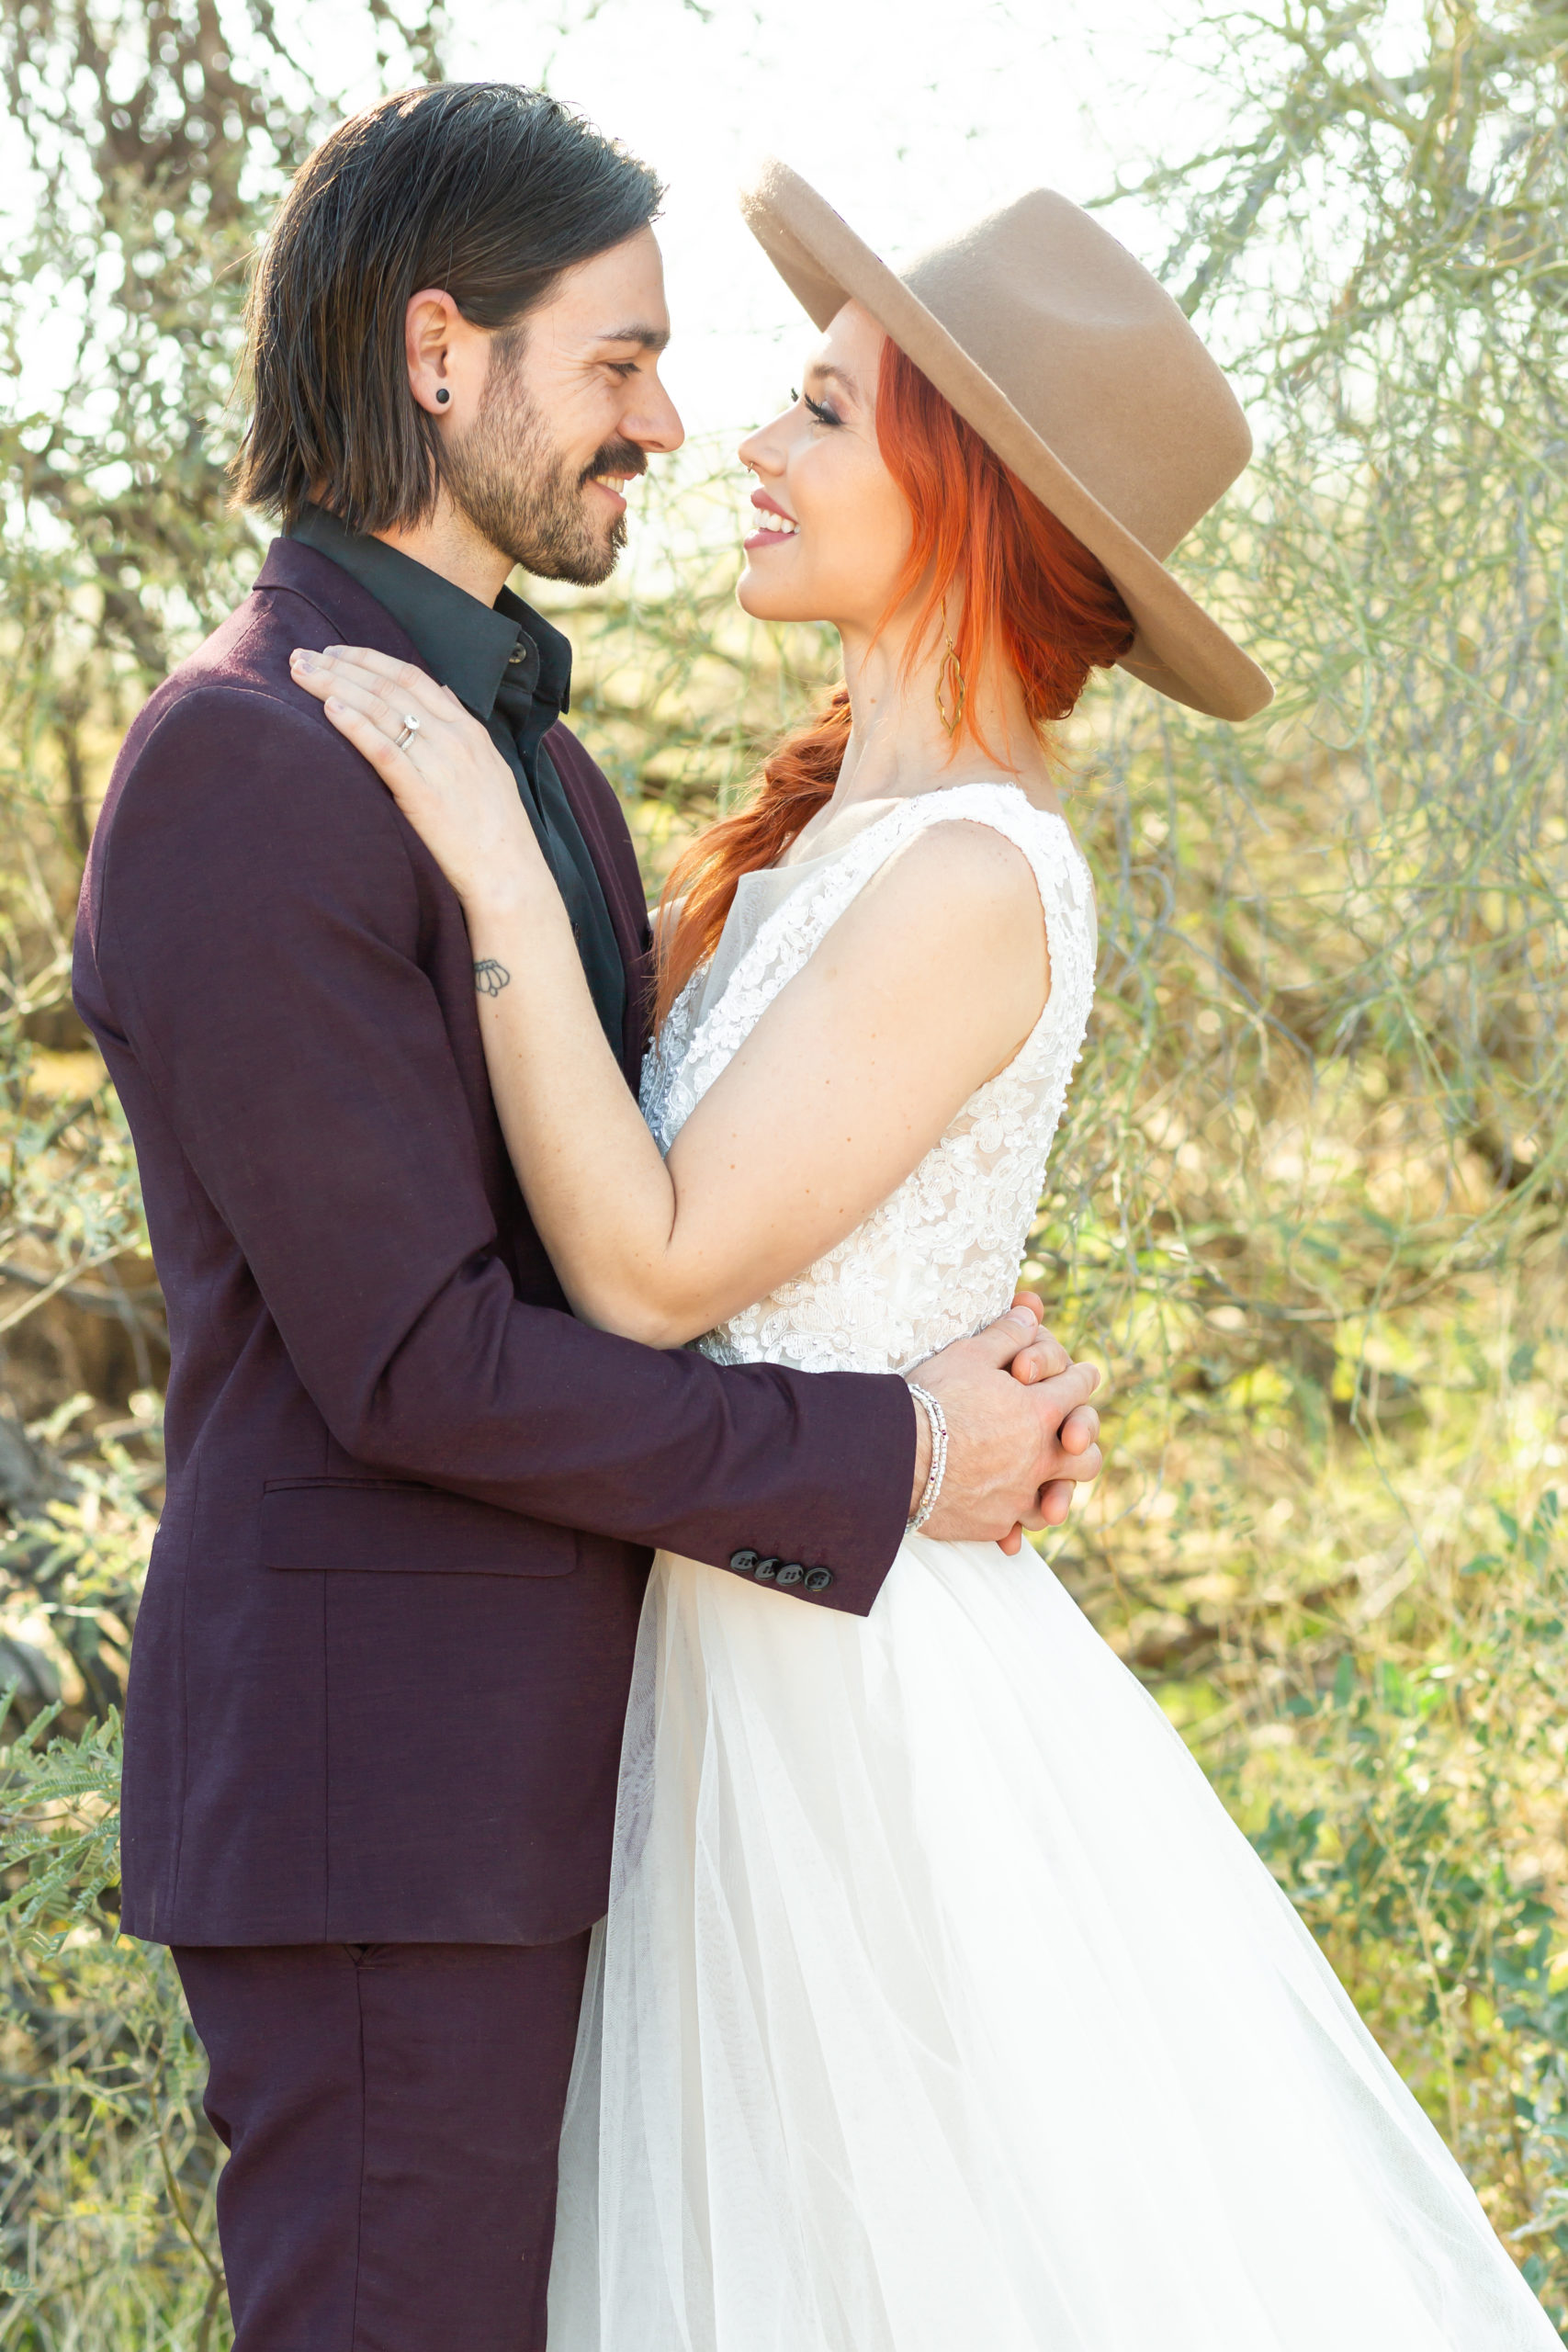 Brooke and Barry couldn't stop smiling during their anniversary portrait session at Saguaro Lake Guest Ranch